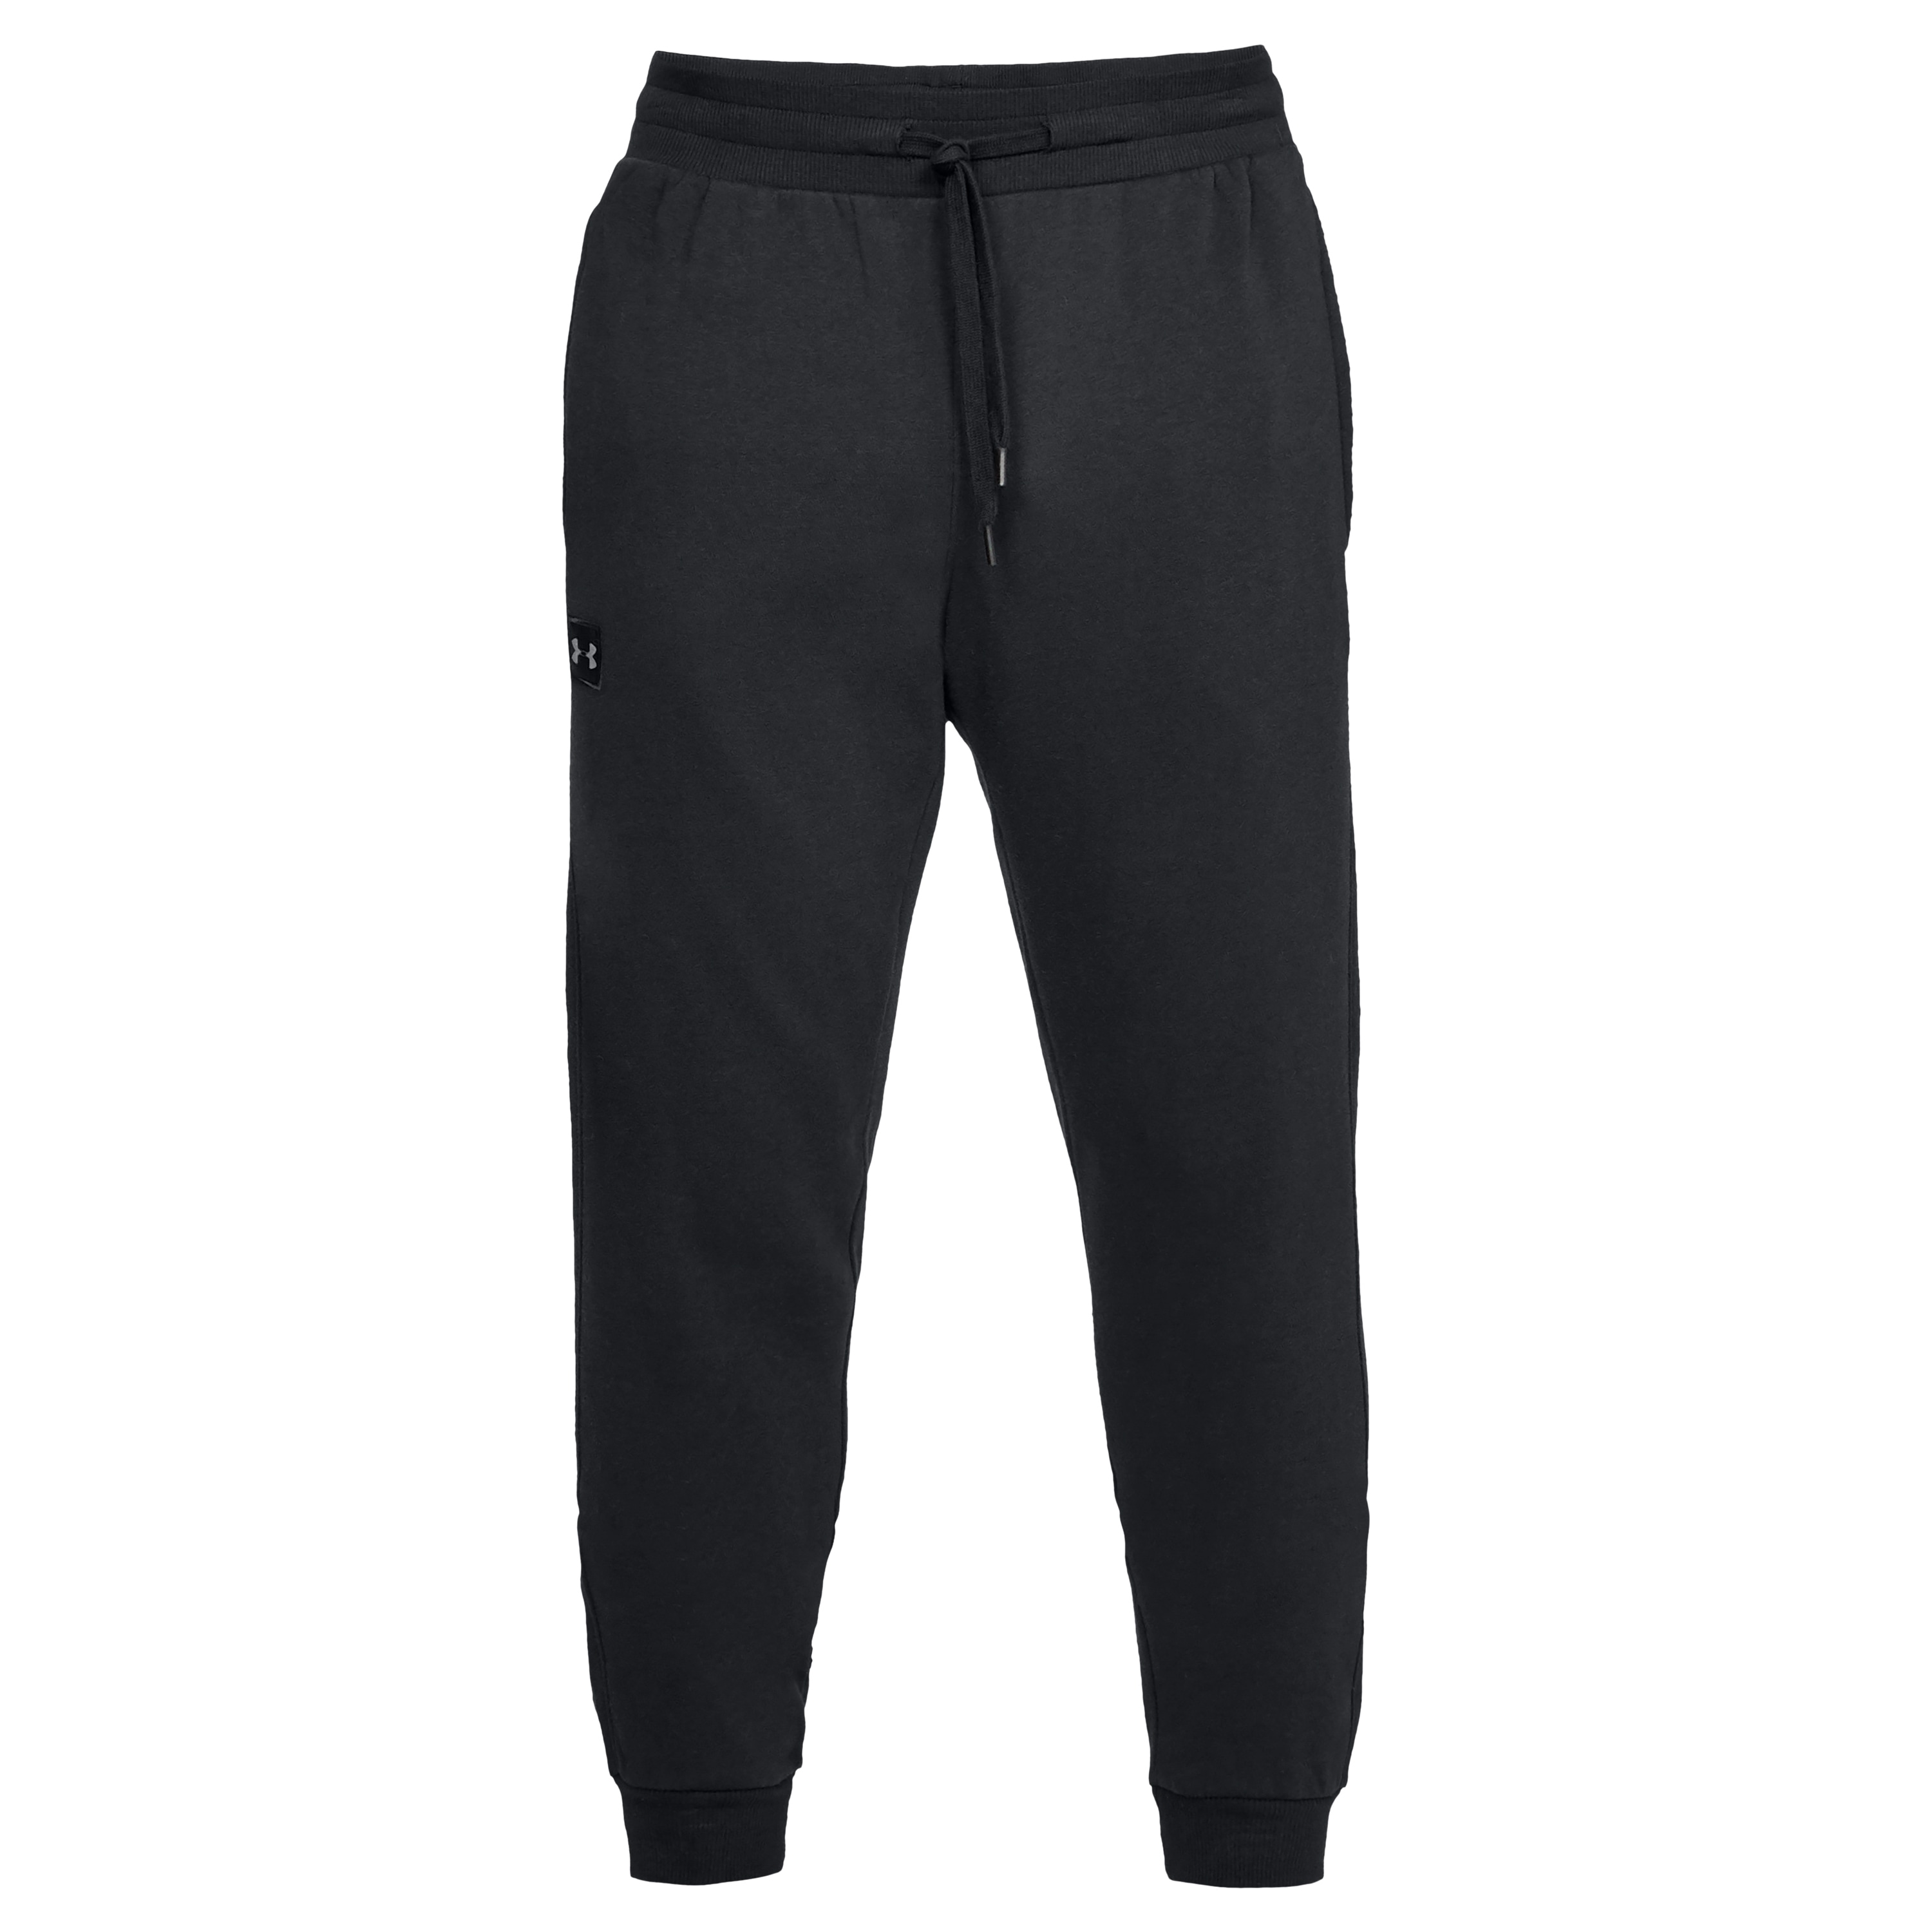 Purchase the Under Armour Jogging Pants Rival Fleece Jogger blac